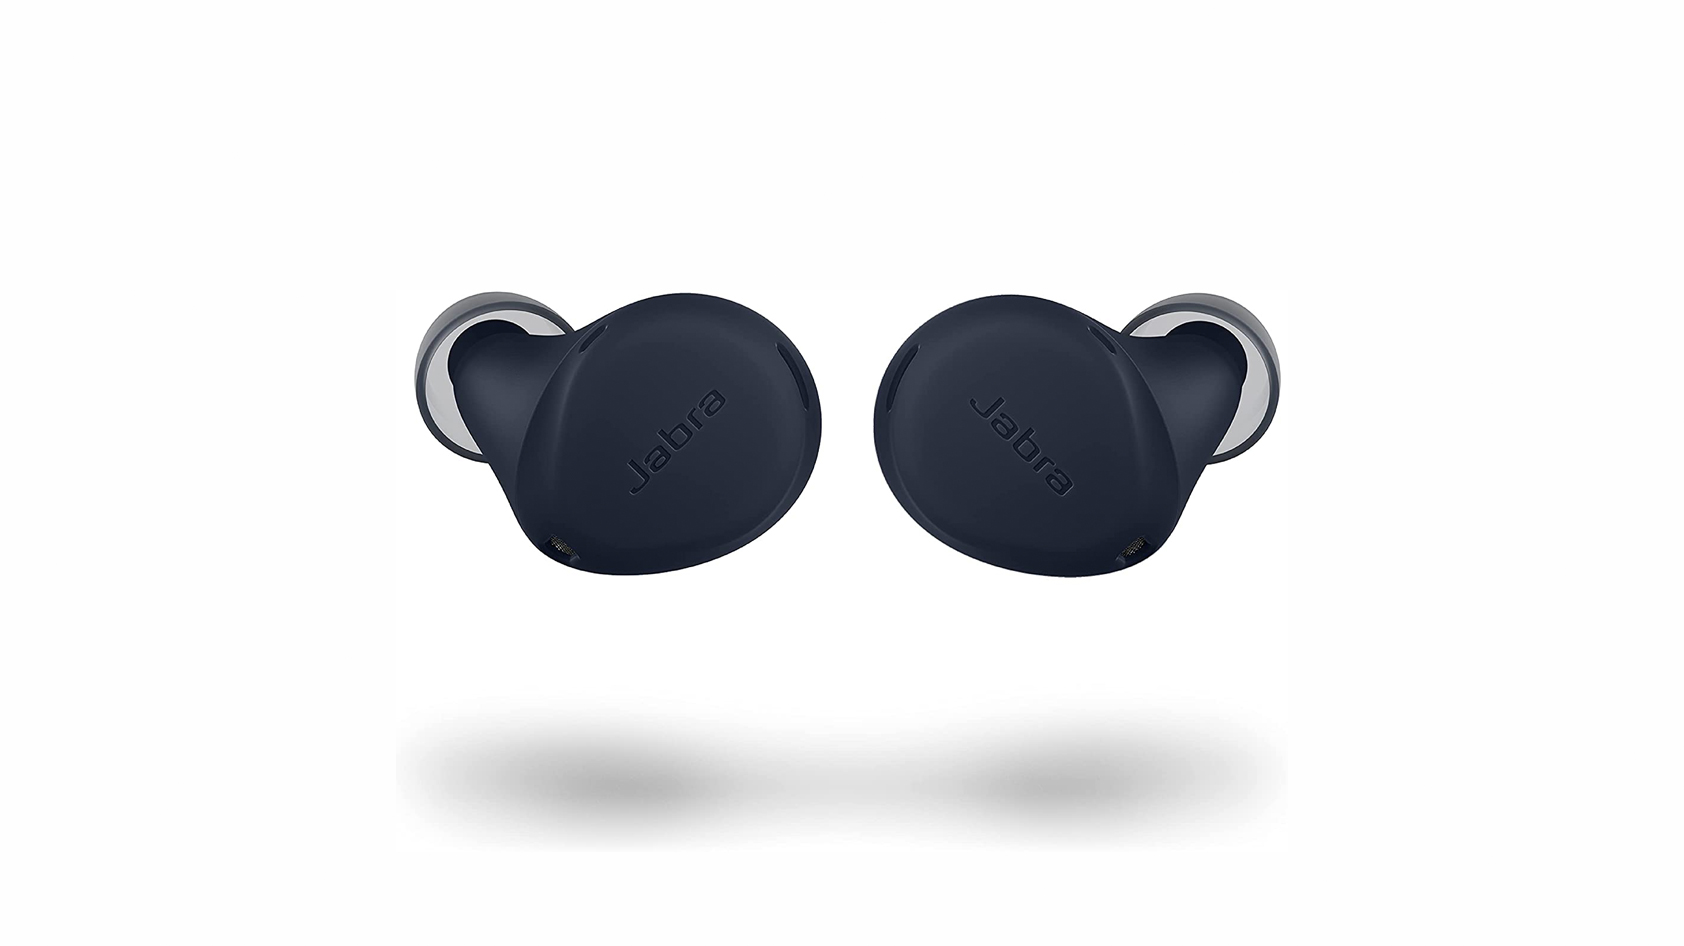 The Jabra Elite 7 Active in navy against a white background.